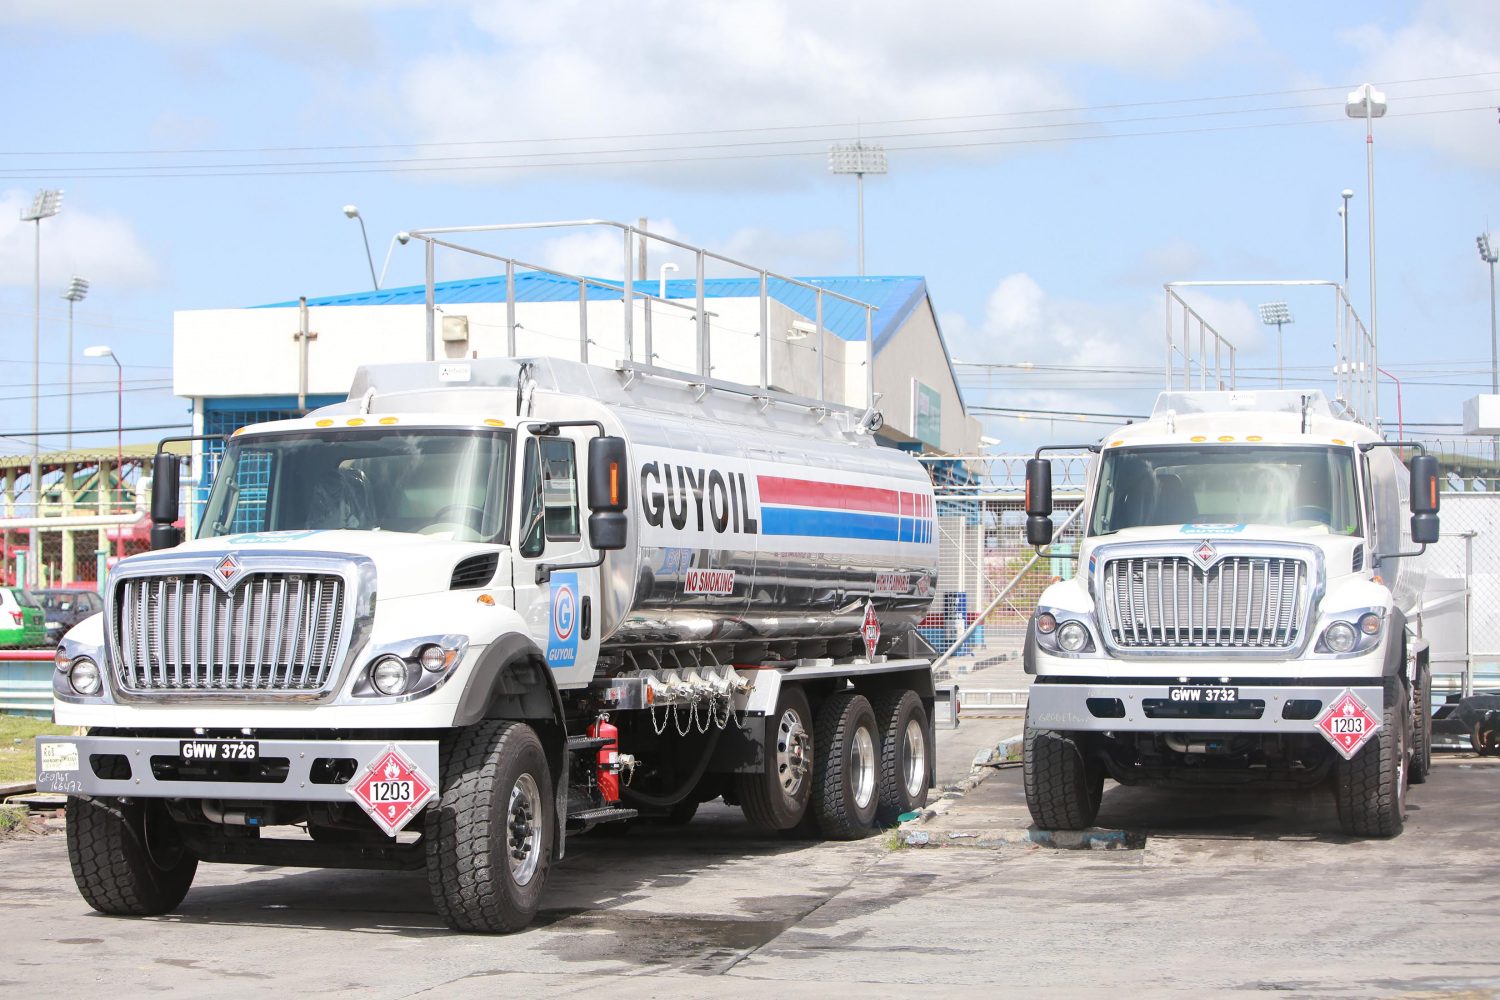 A closer look at two of the three new tankers at the Guyoil Providence, East Bank Demerara terminal.